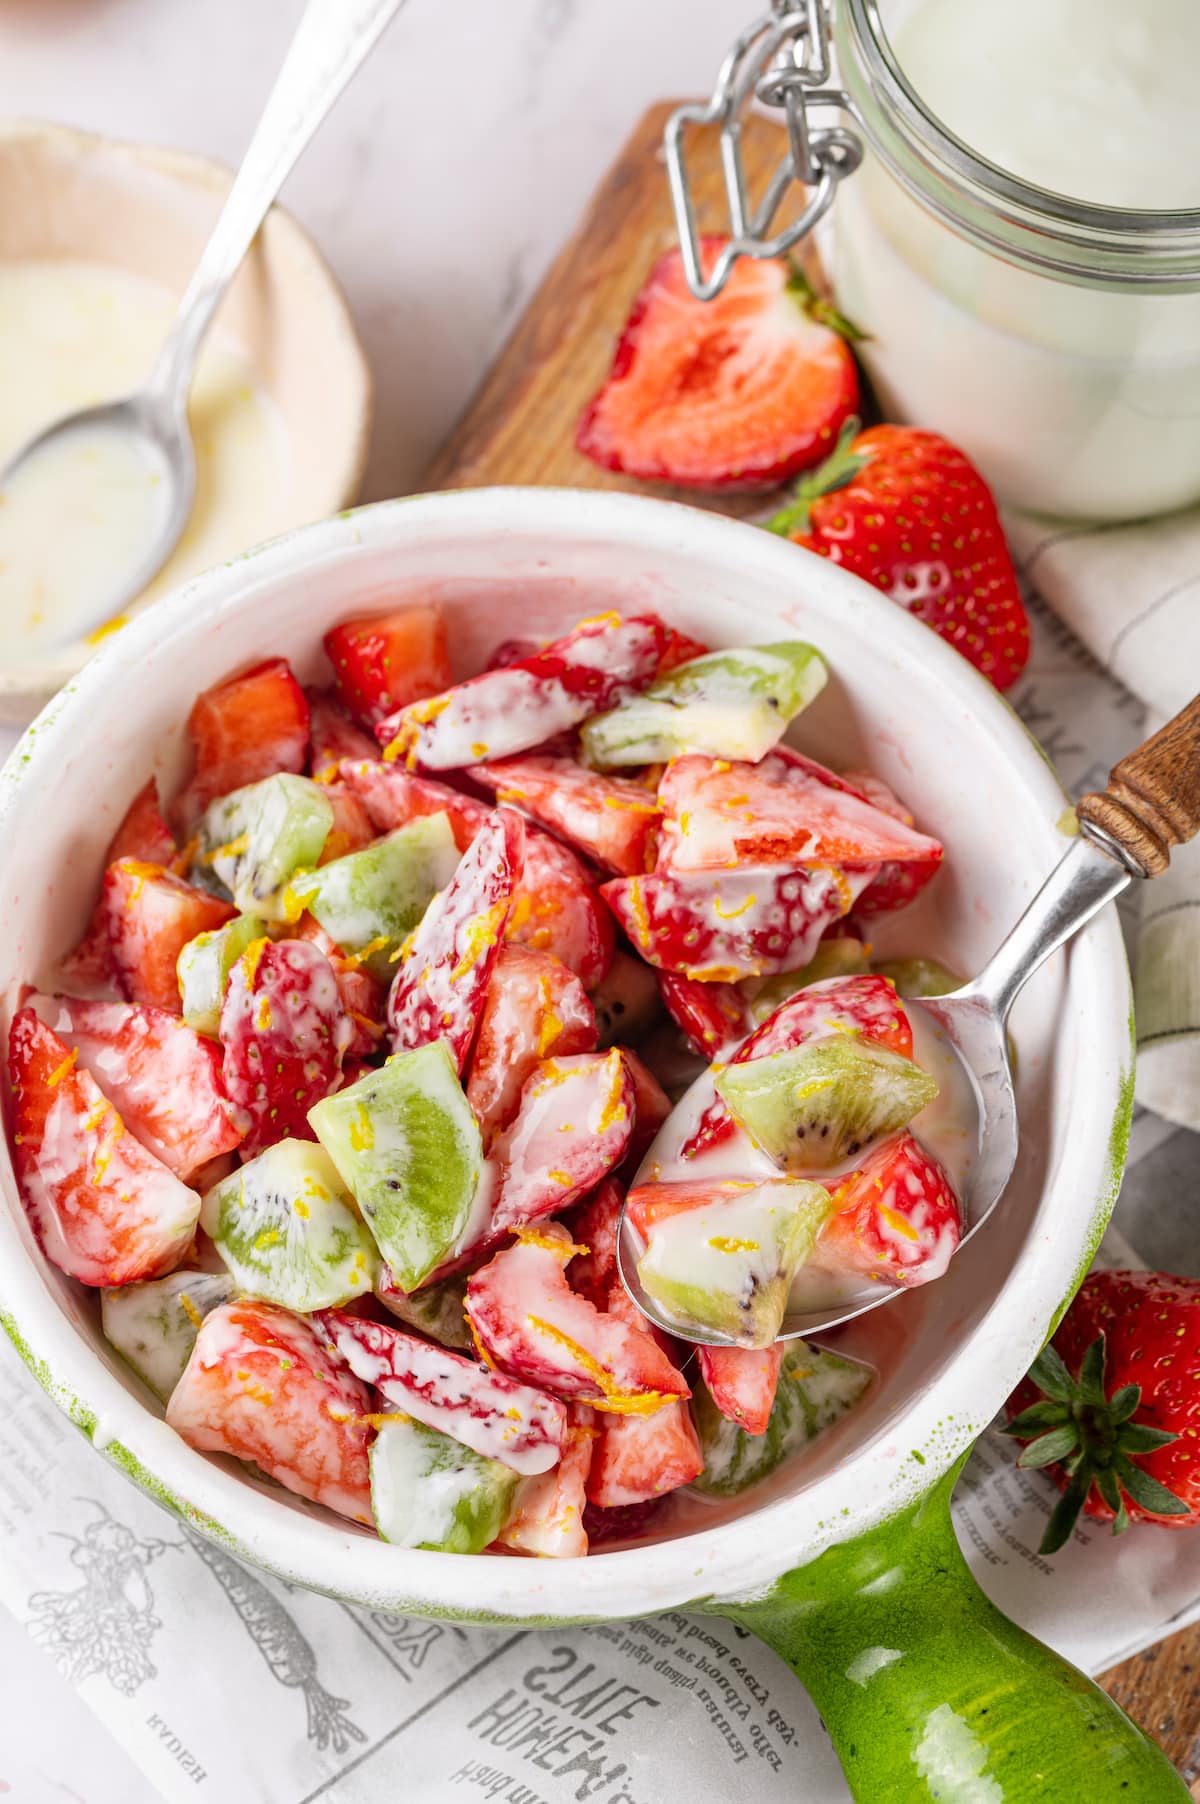 chopped strawberry and kiwi mixed with yogurt orange zest in a white bowl with green handle and wooden stainless steel spoon. 